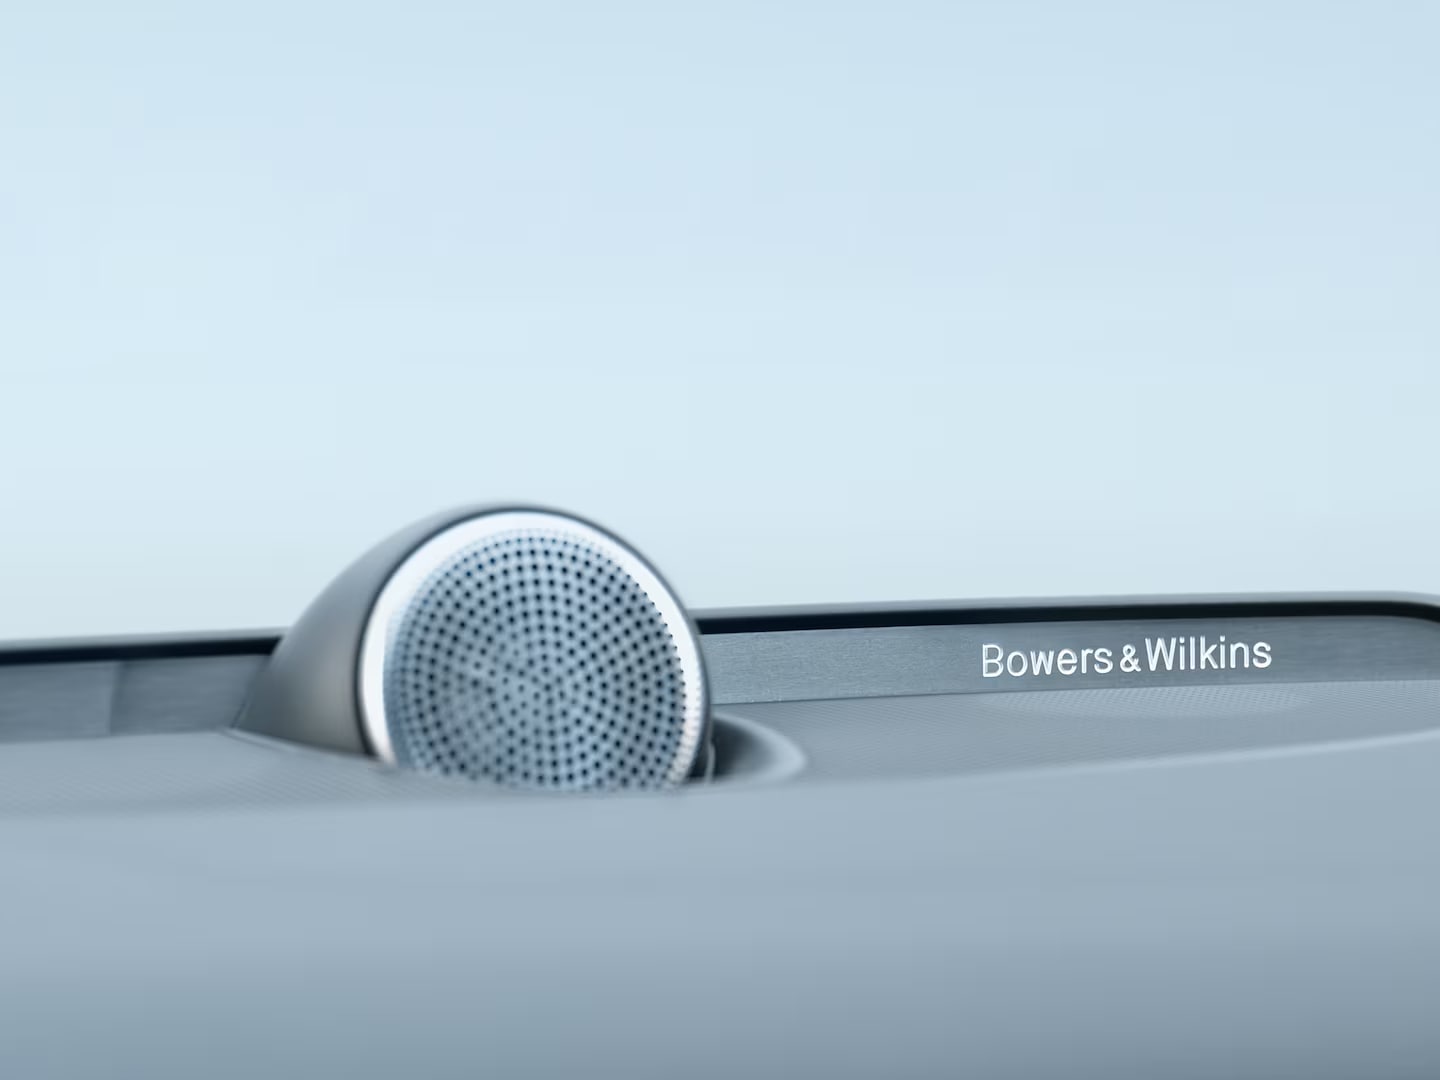 Close-up of a Bowers & Wilkins dashboard speaker in the Volvo Recharge S60 plug-in hybrid.